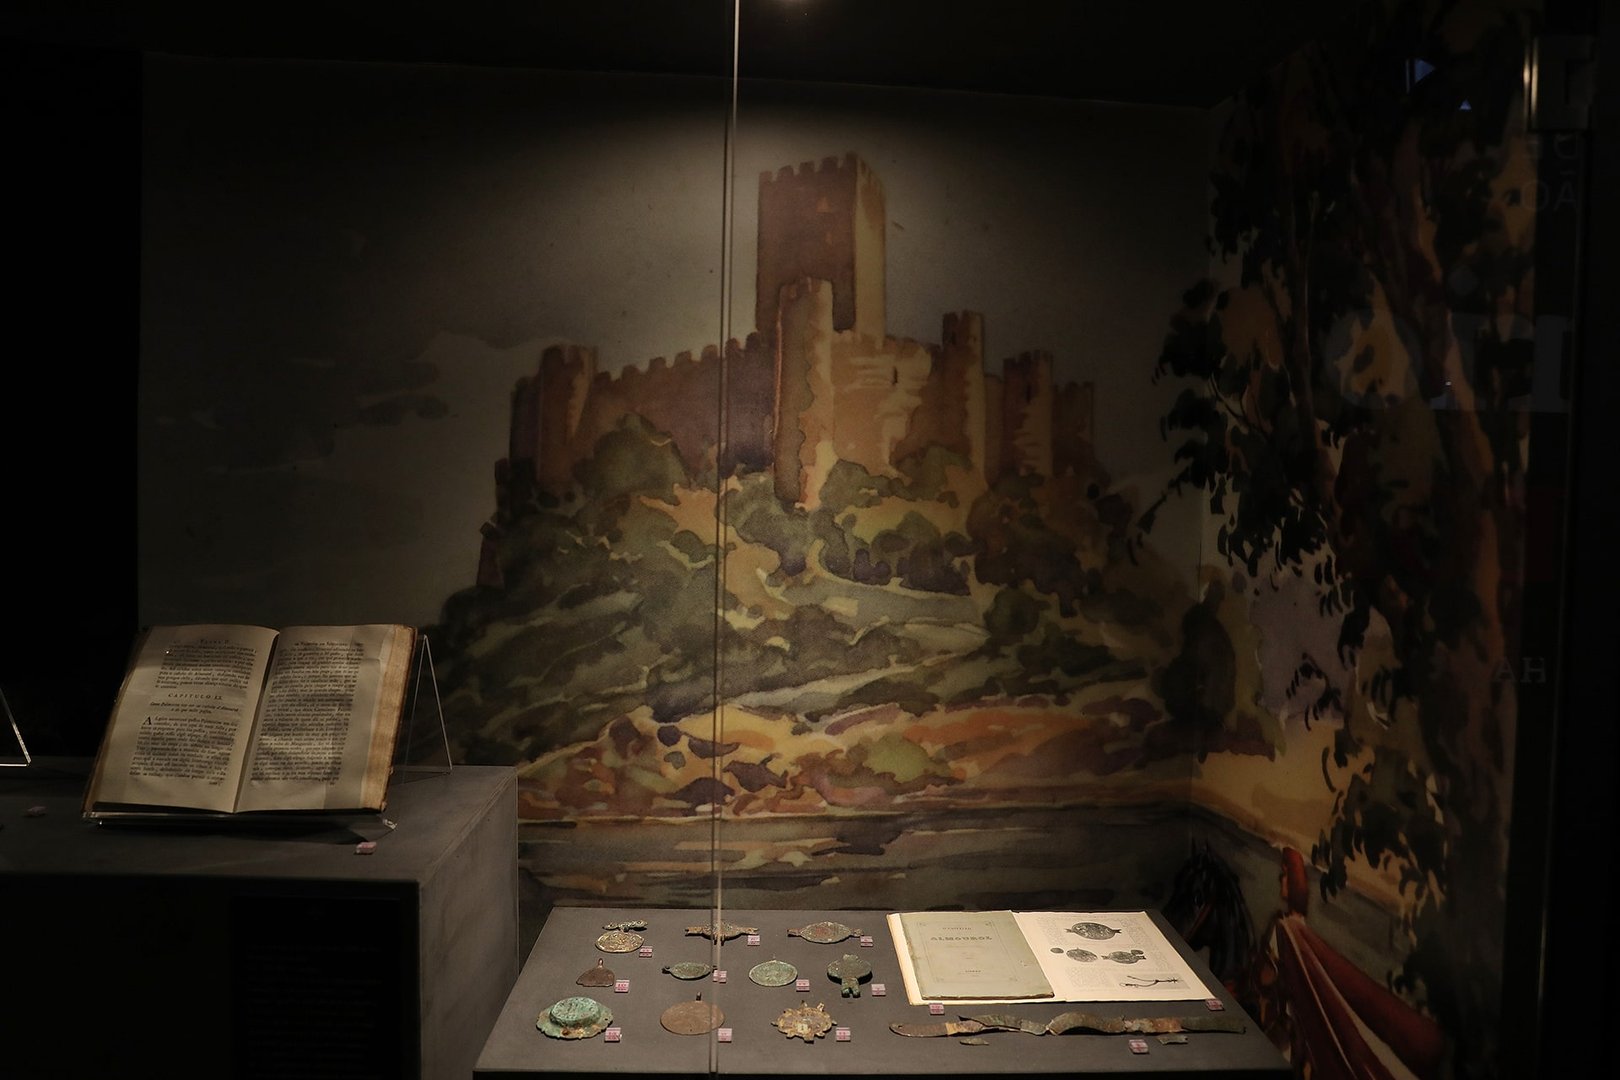 Archaeological finds found in the Castle of Almourol in 1899 are on display at CITA